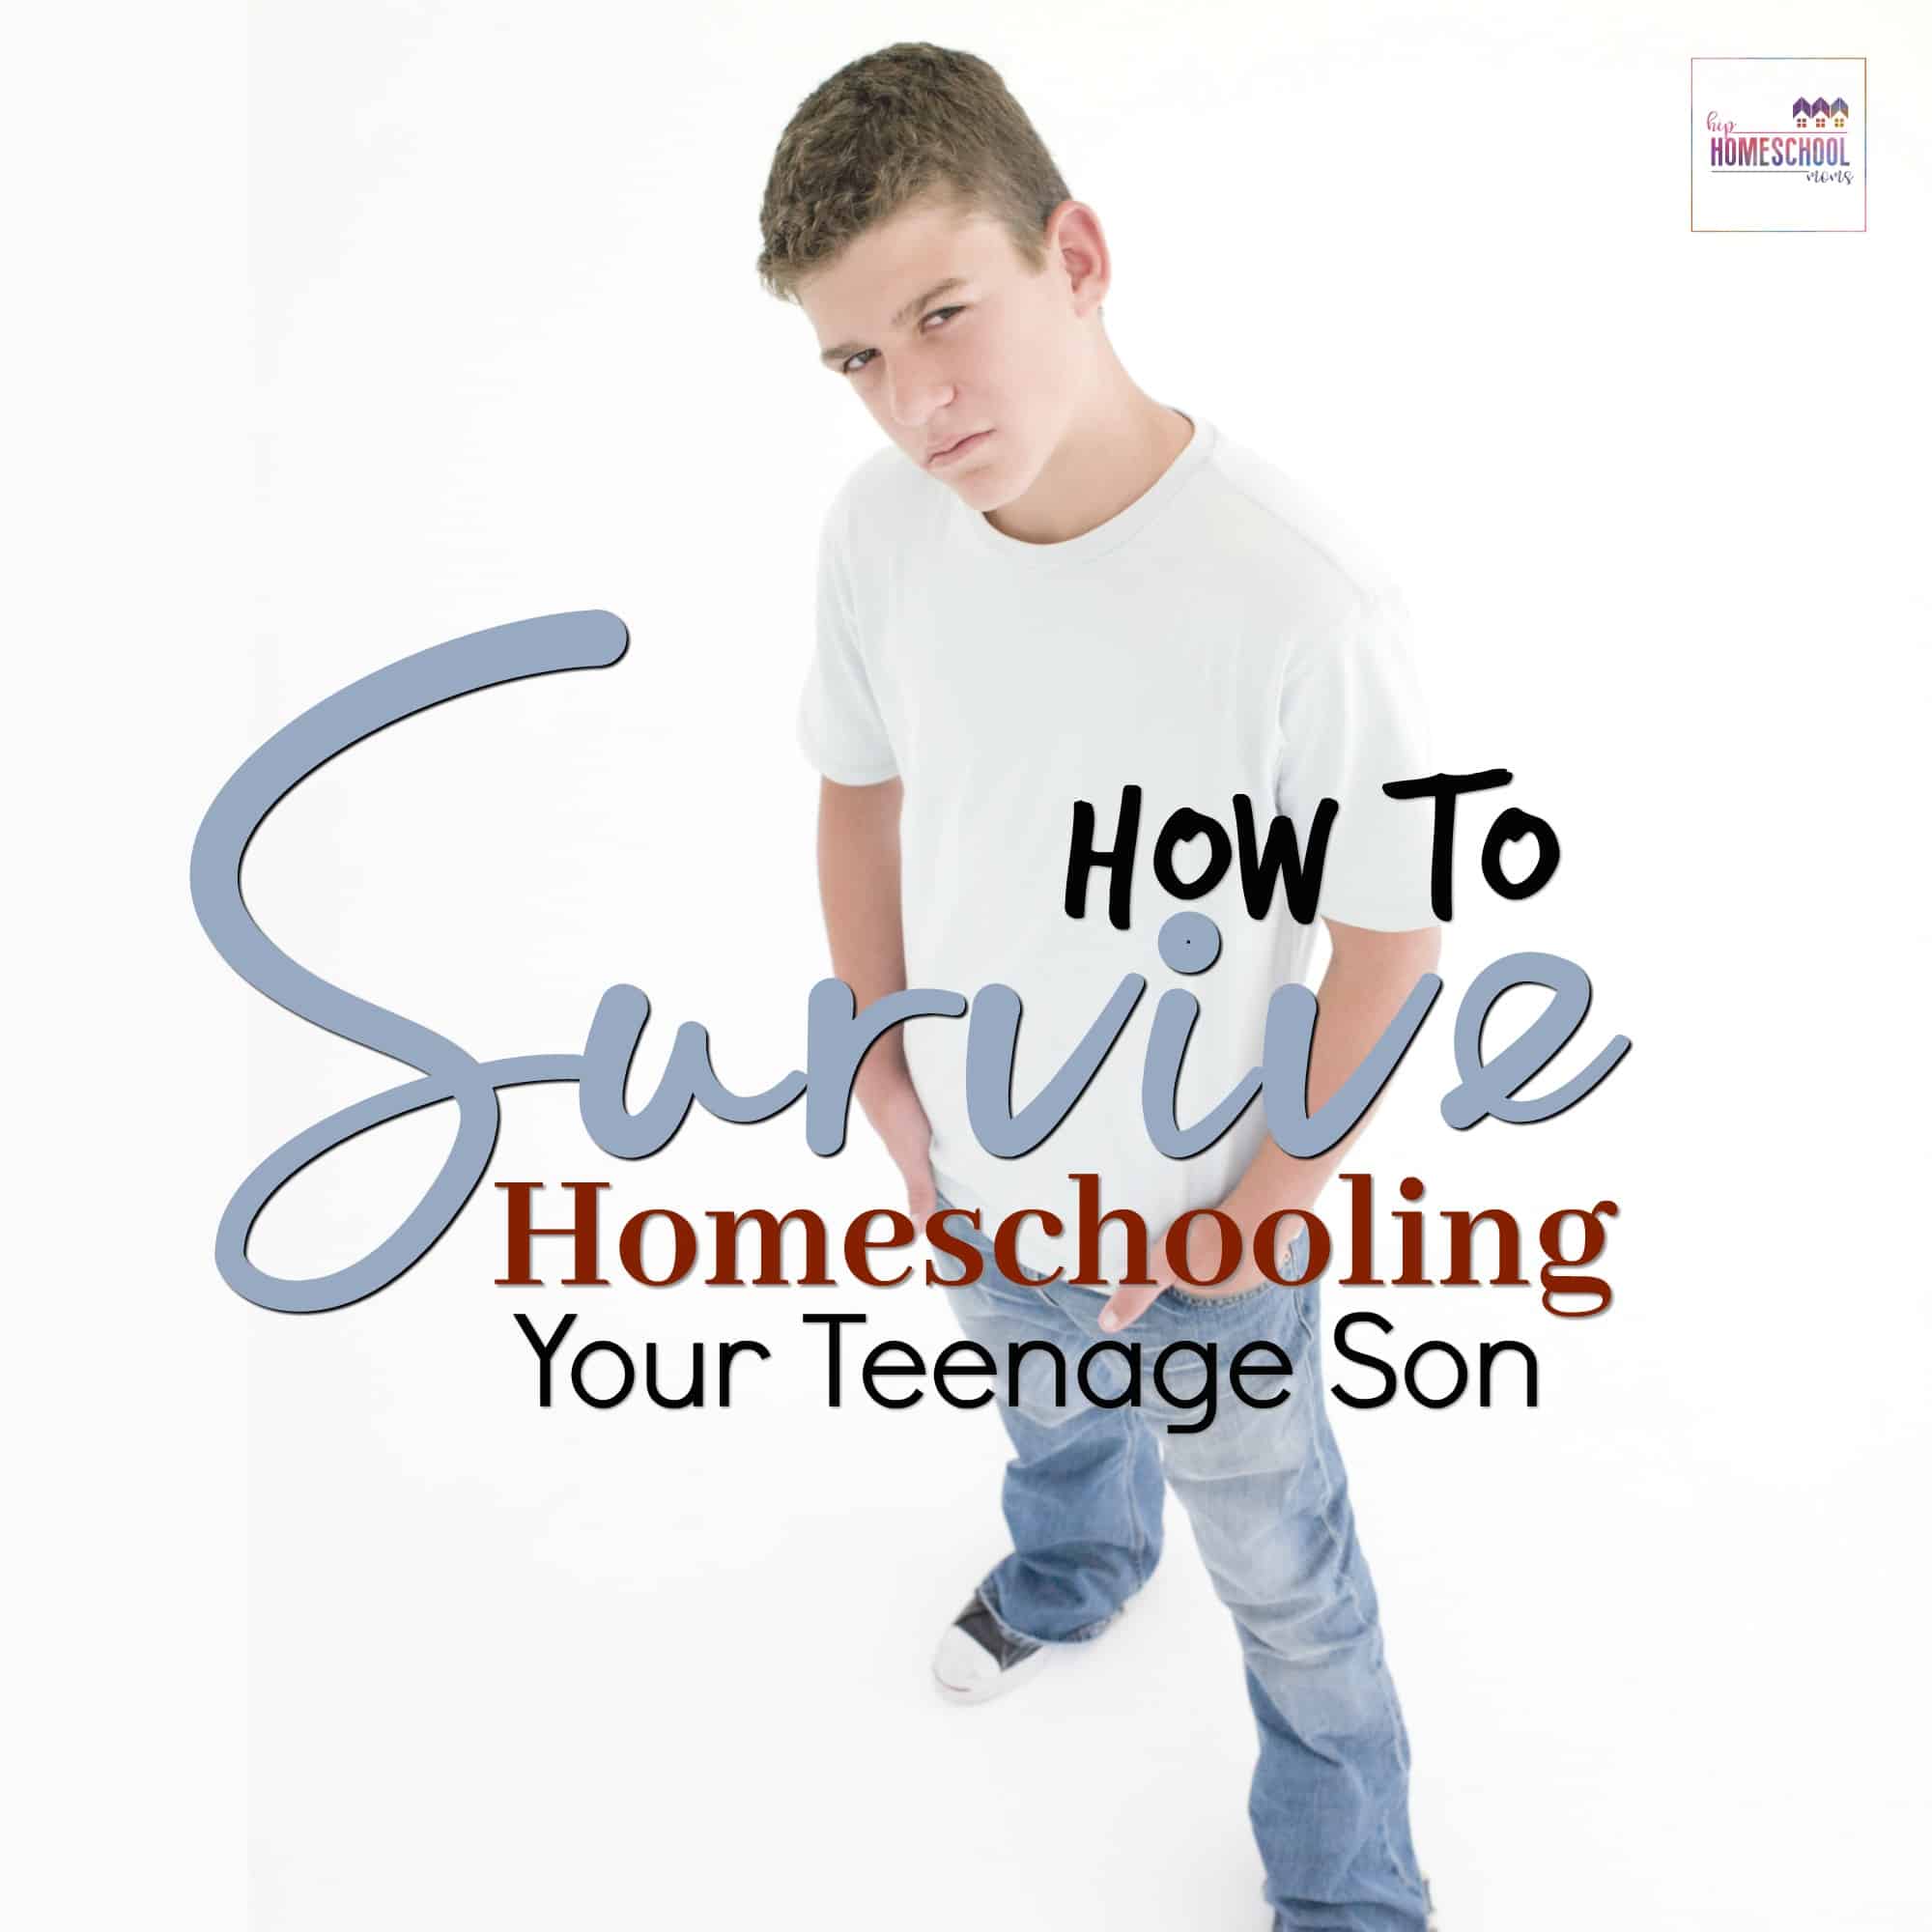 How to Survive Homeschooling Your Teenage Son